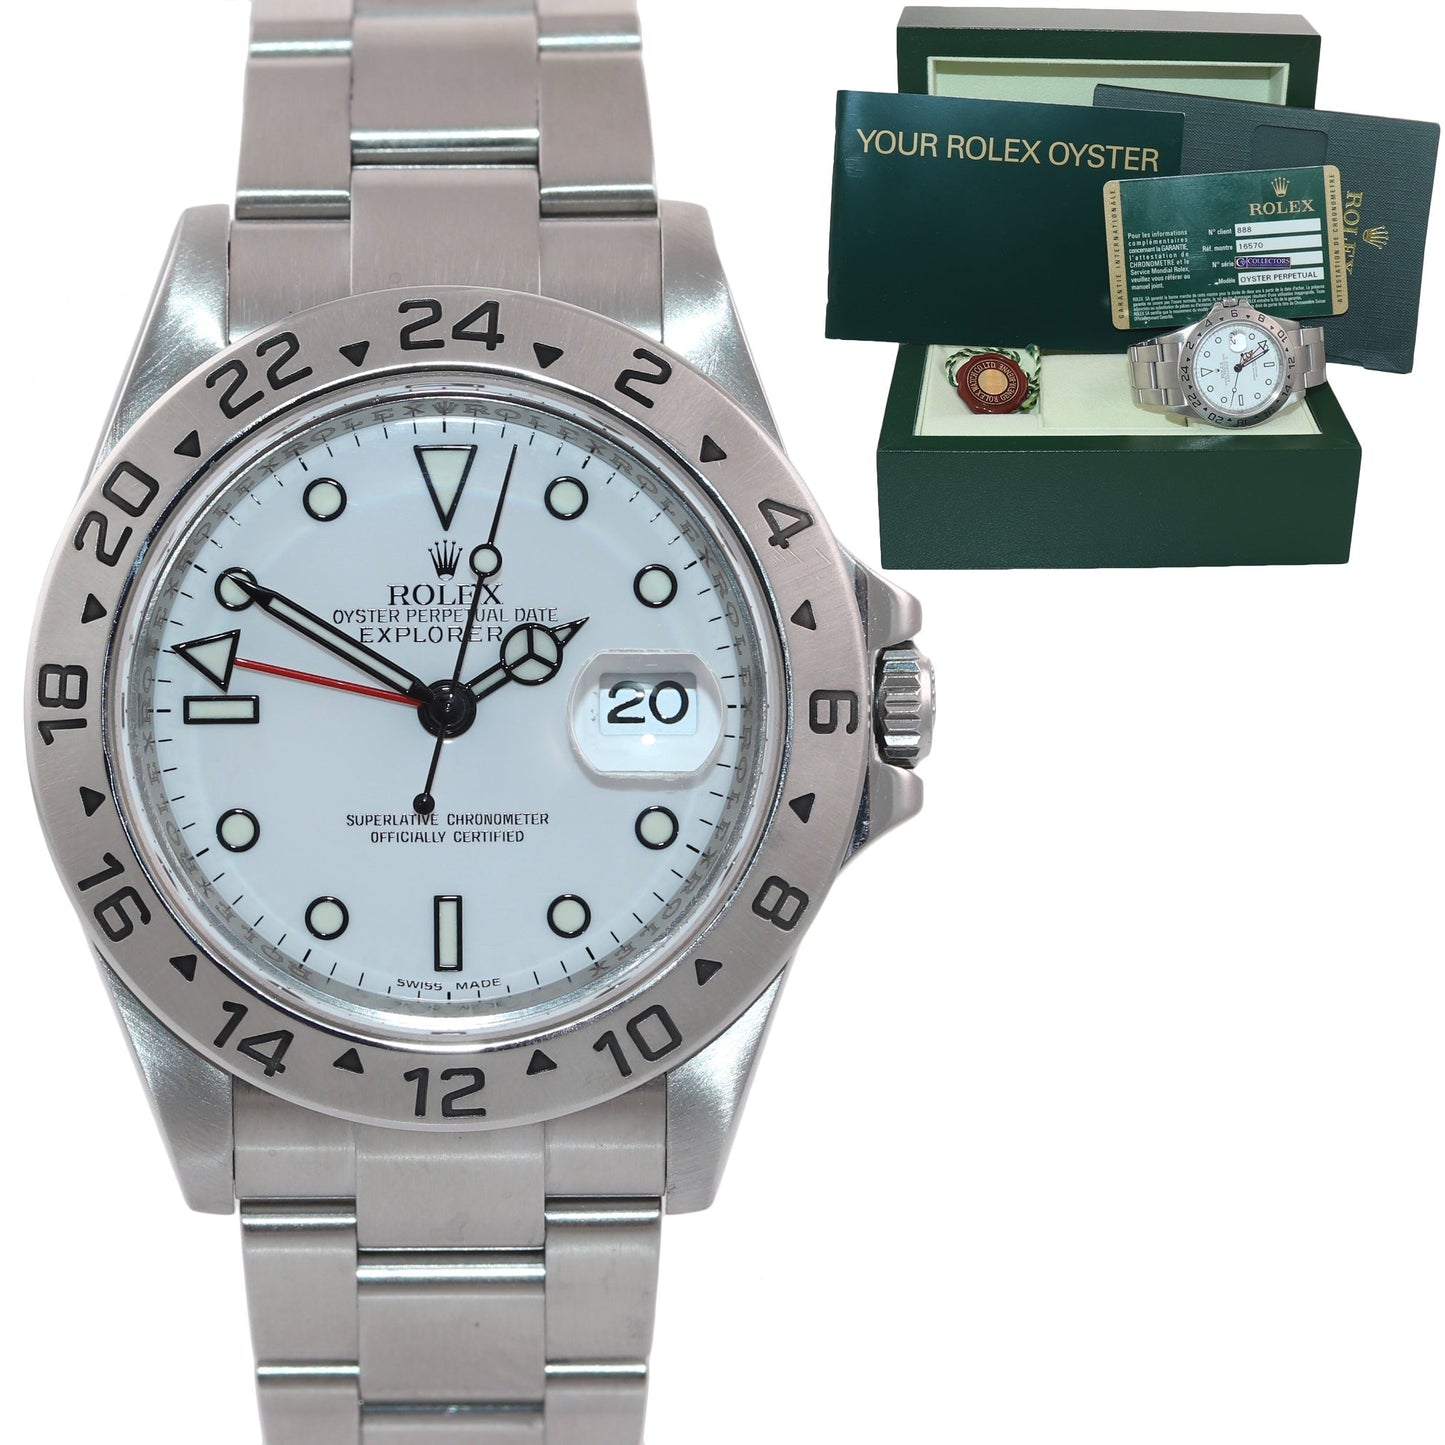 2010 PAPERS Rolex Explorer II 16570 Polar White Dial Steel 40mm 3186 Watch Box